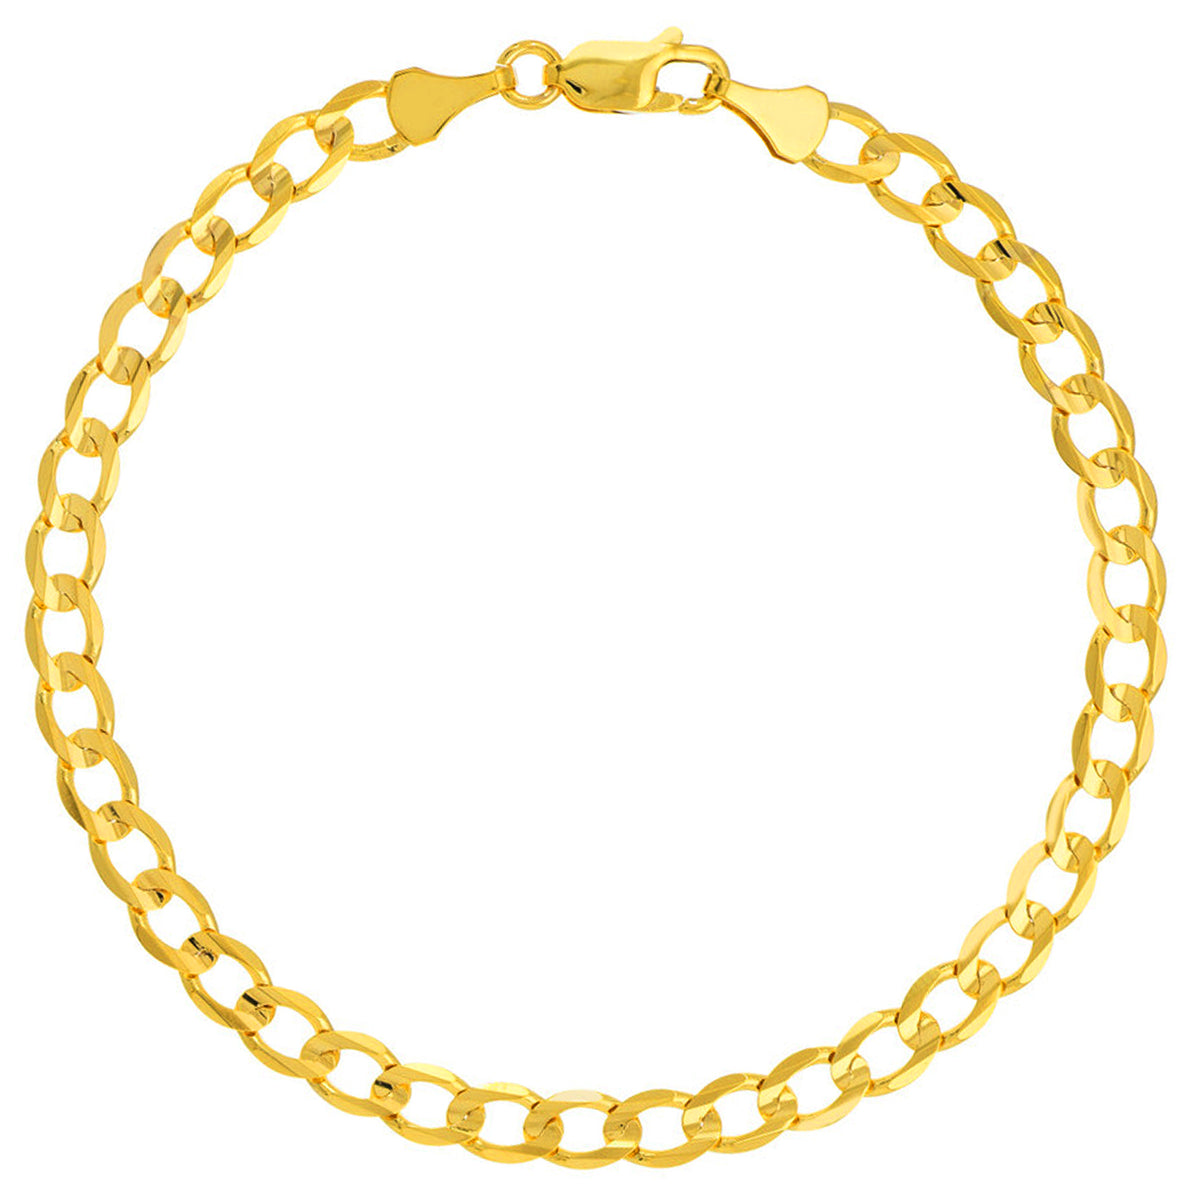 14k Yellow Gold 3.5mm Hollow Open Curb Chain Bracelet with Lobster Lock